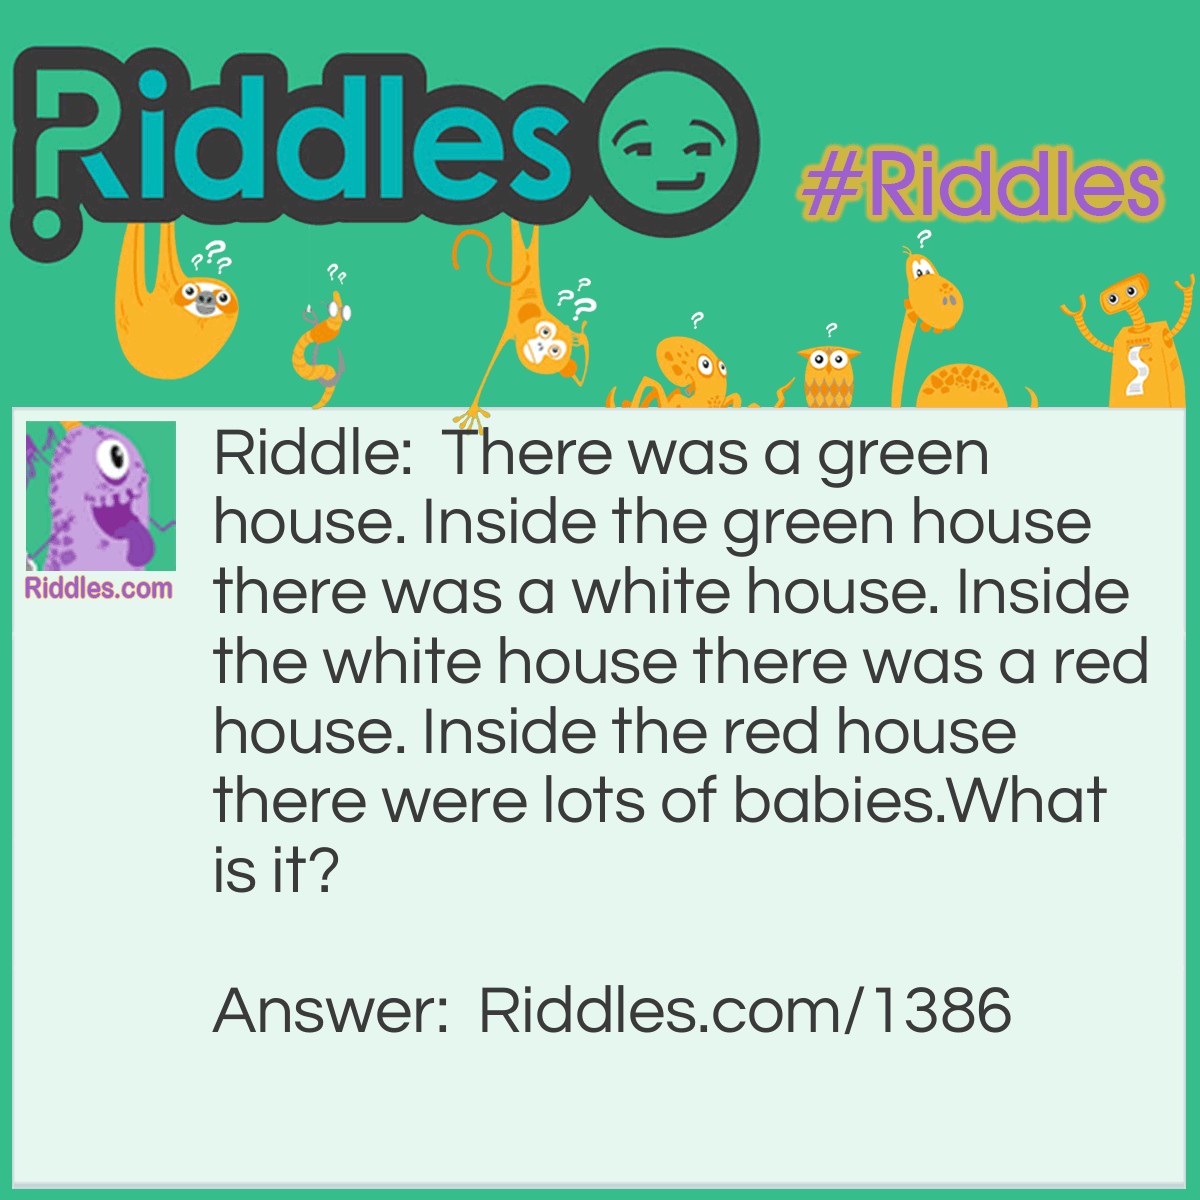 Riddle: There was a green house. Inside the green house there was a white house. Inside the white house there was a red house. Inside the red house there were lots of babies.
What is it? Answer: A watermelon.